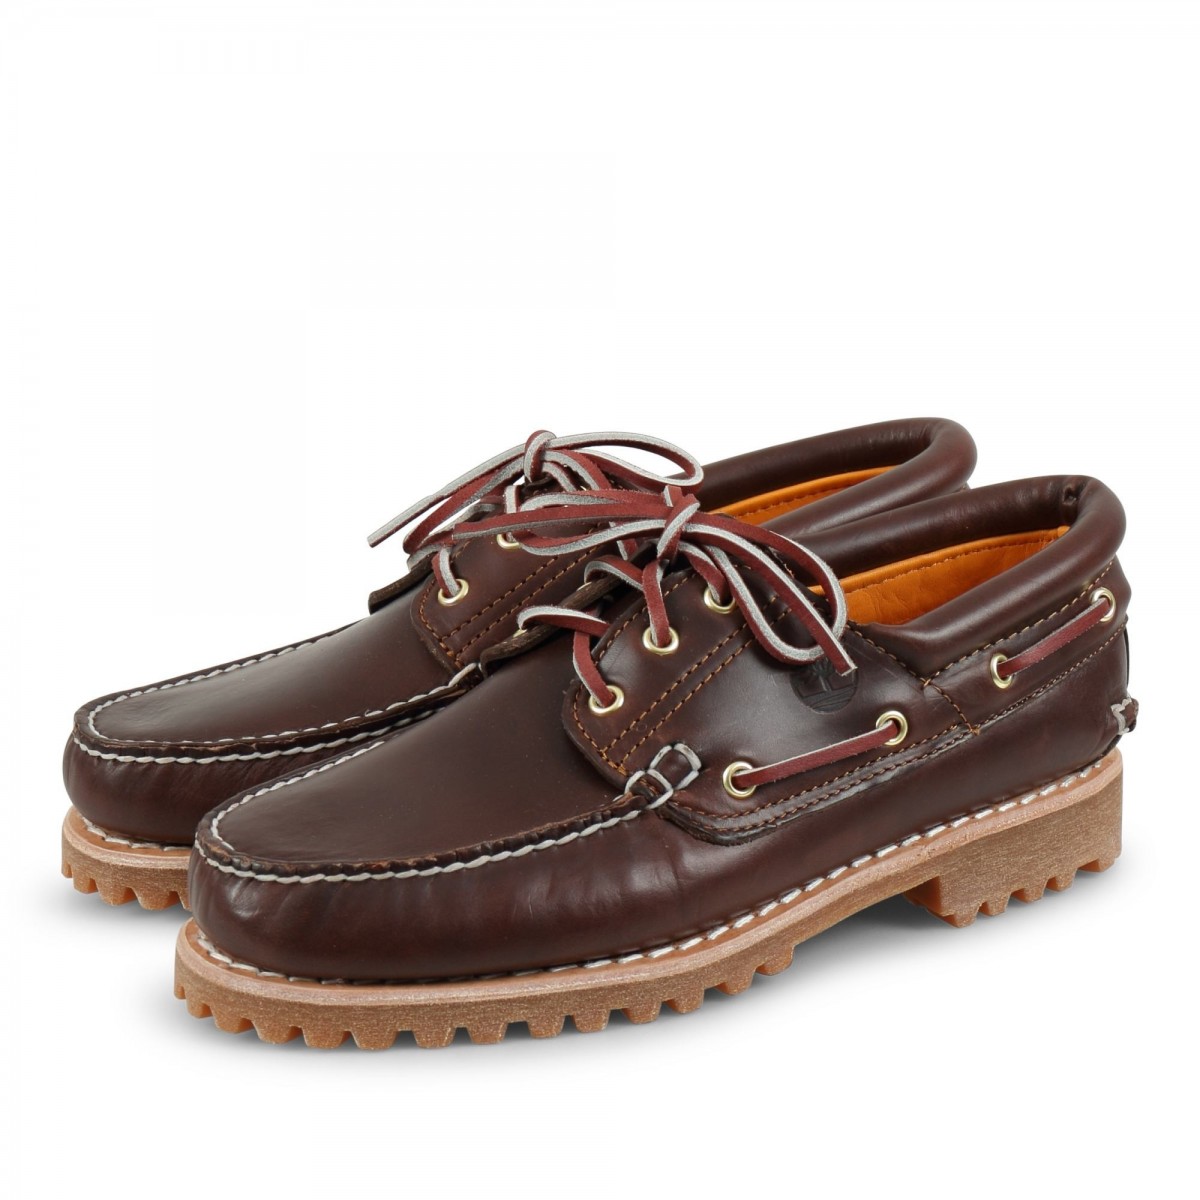 AUTHENTIC HANDSEWN BOAT SHOE